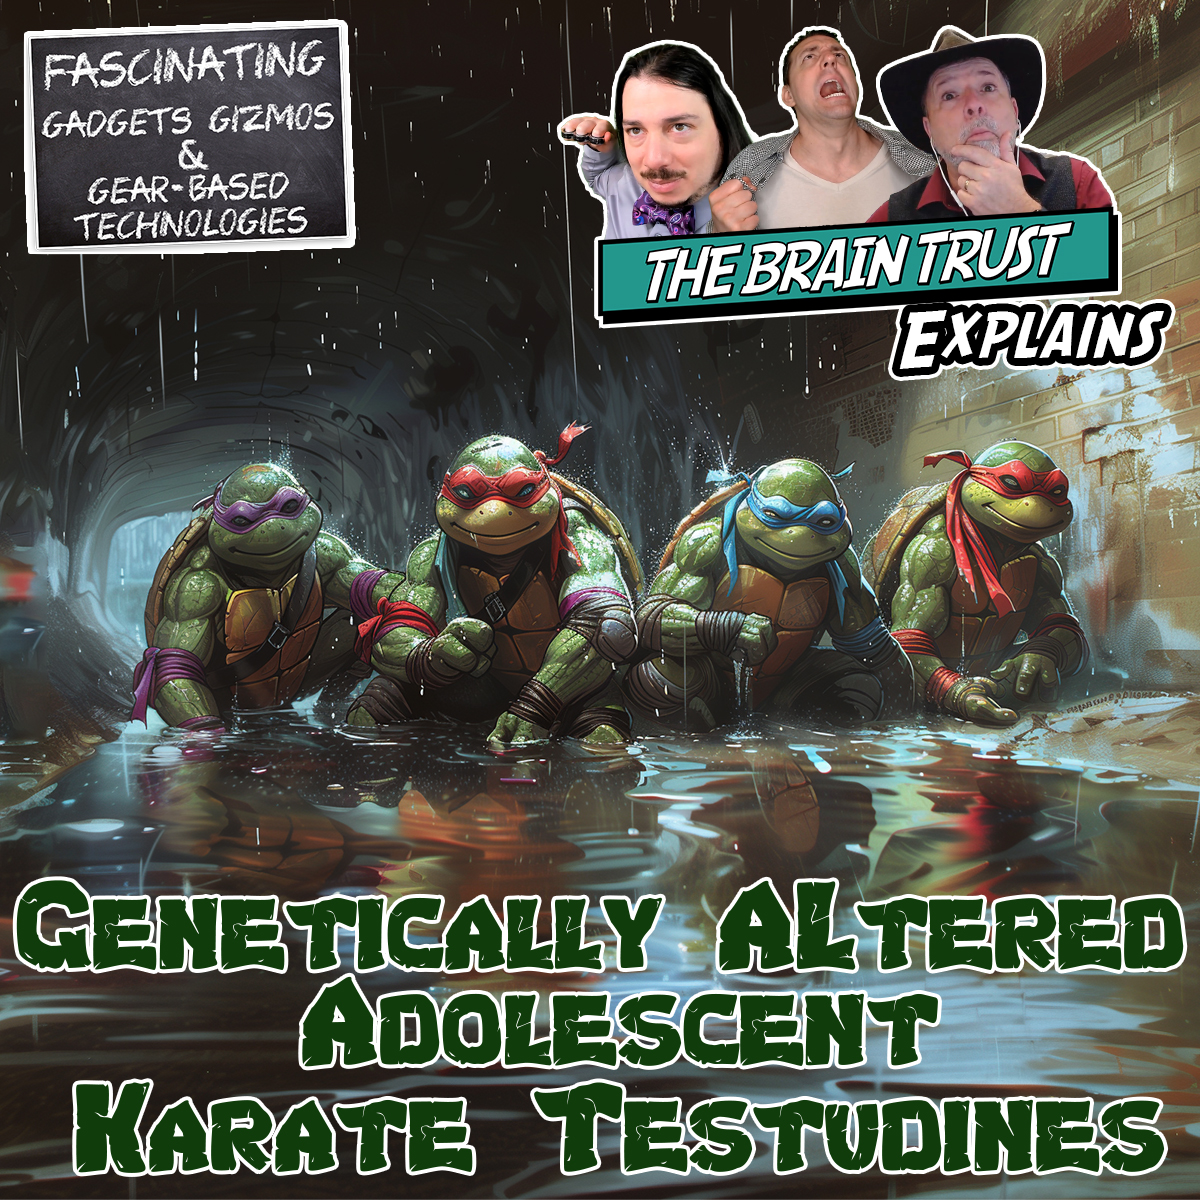 You are currently viewing Ep. 183 Genetically Altered, Adolescent, Karate Testudies (Video)